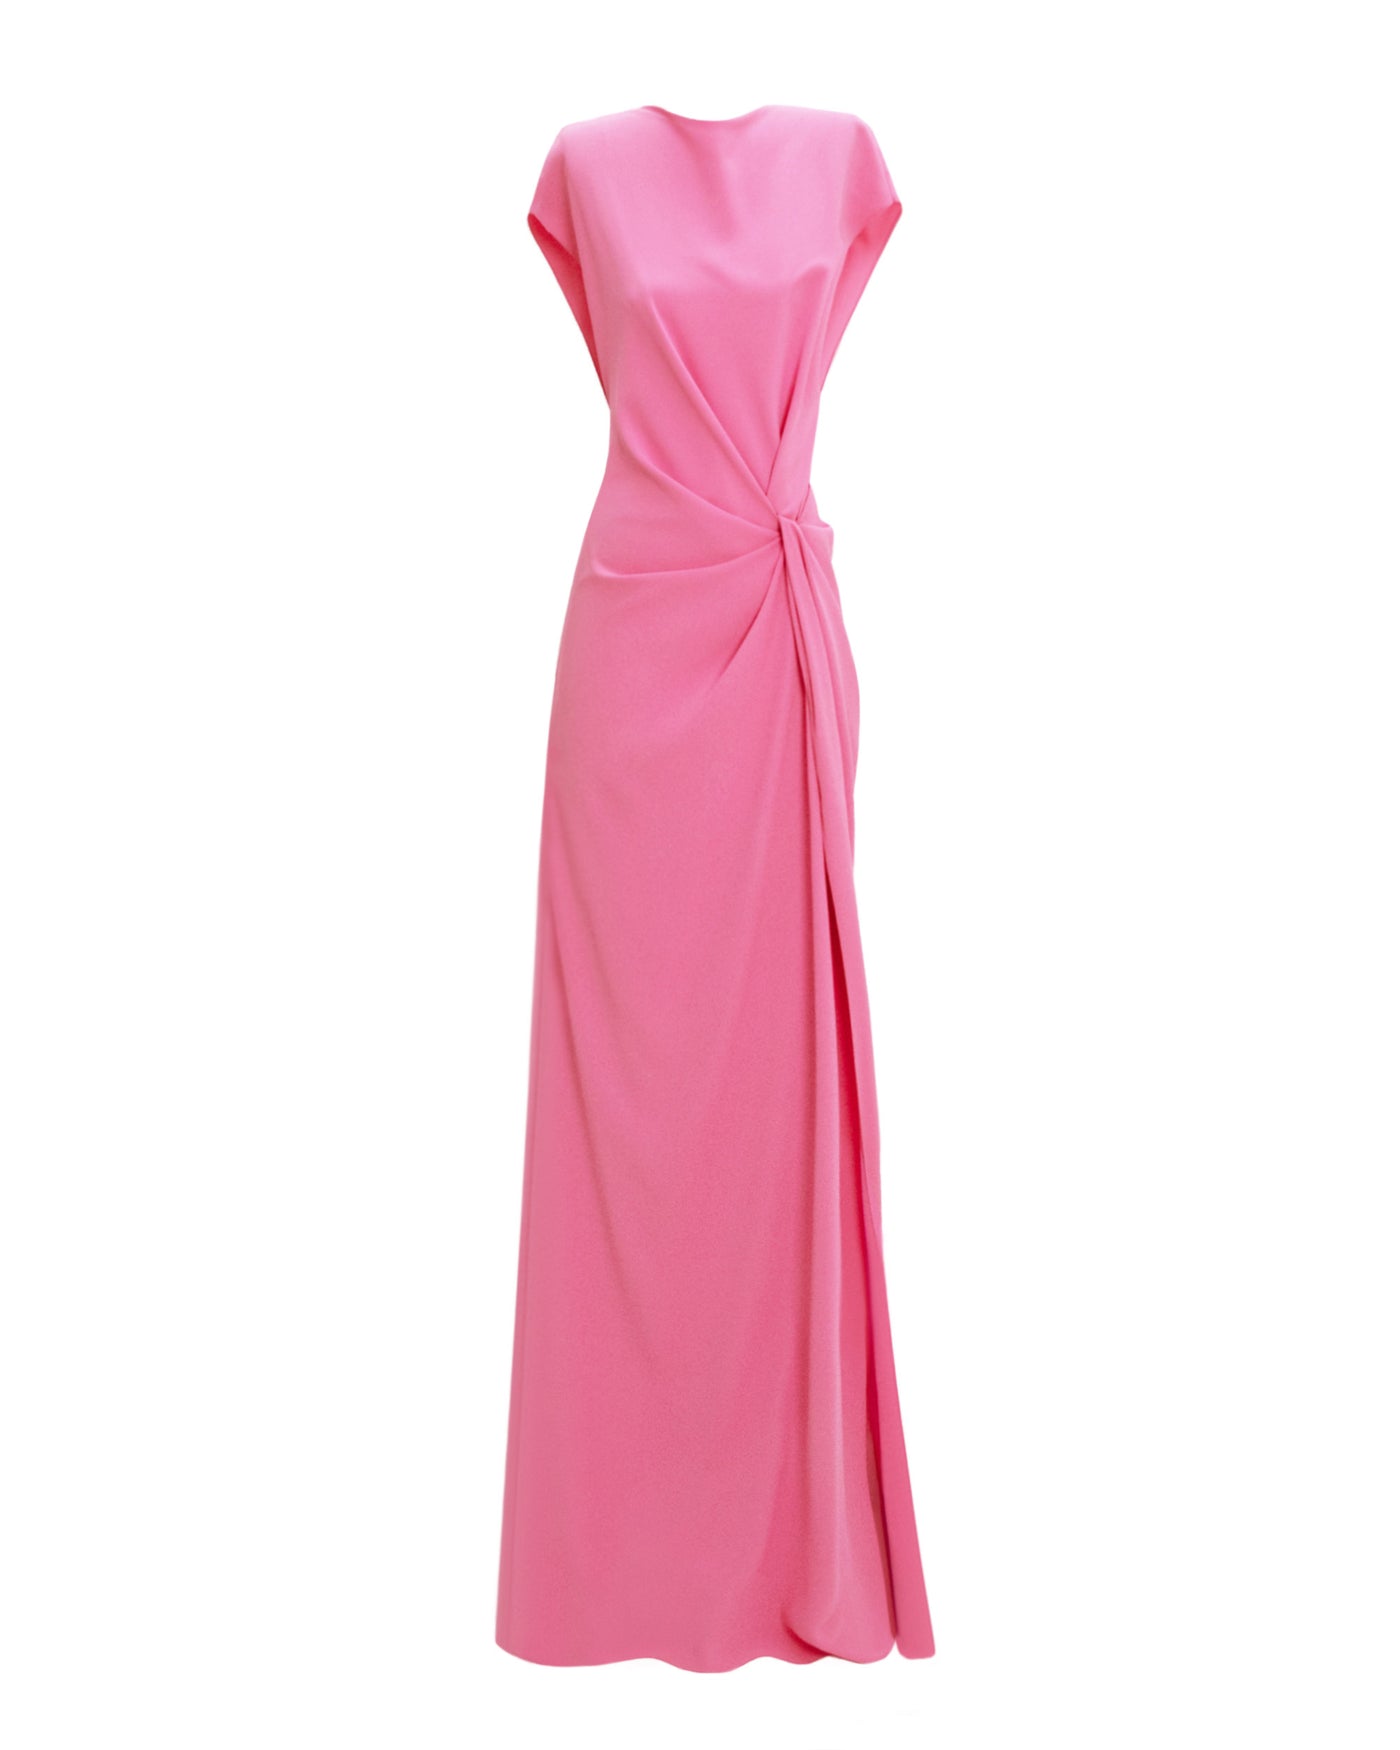 Loose Cut Candy Pink Dress With Draping's